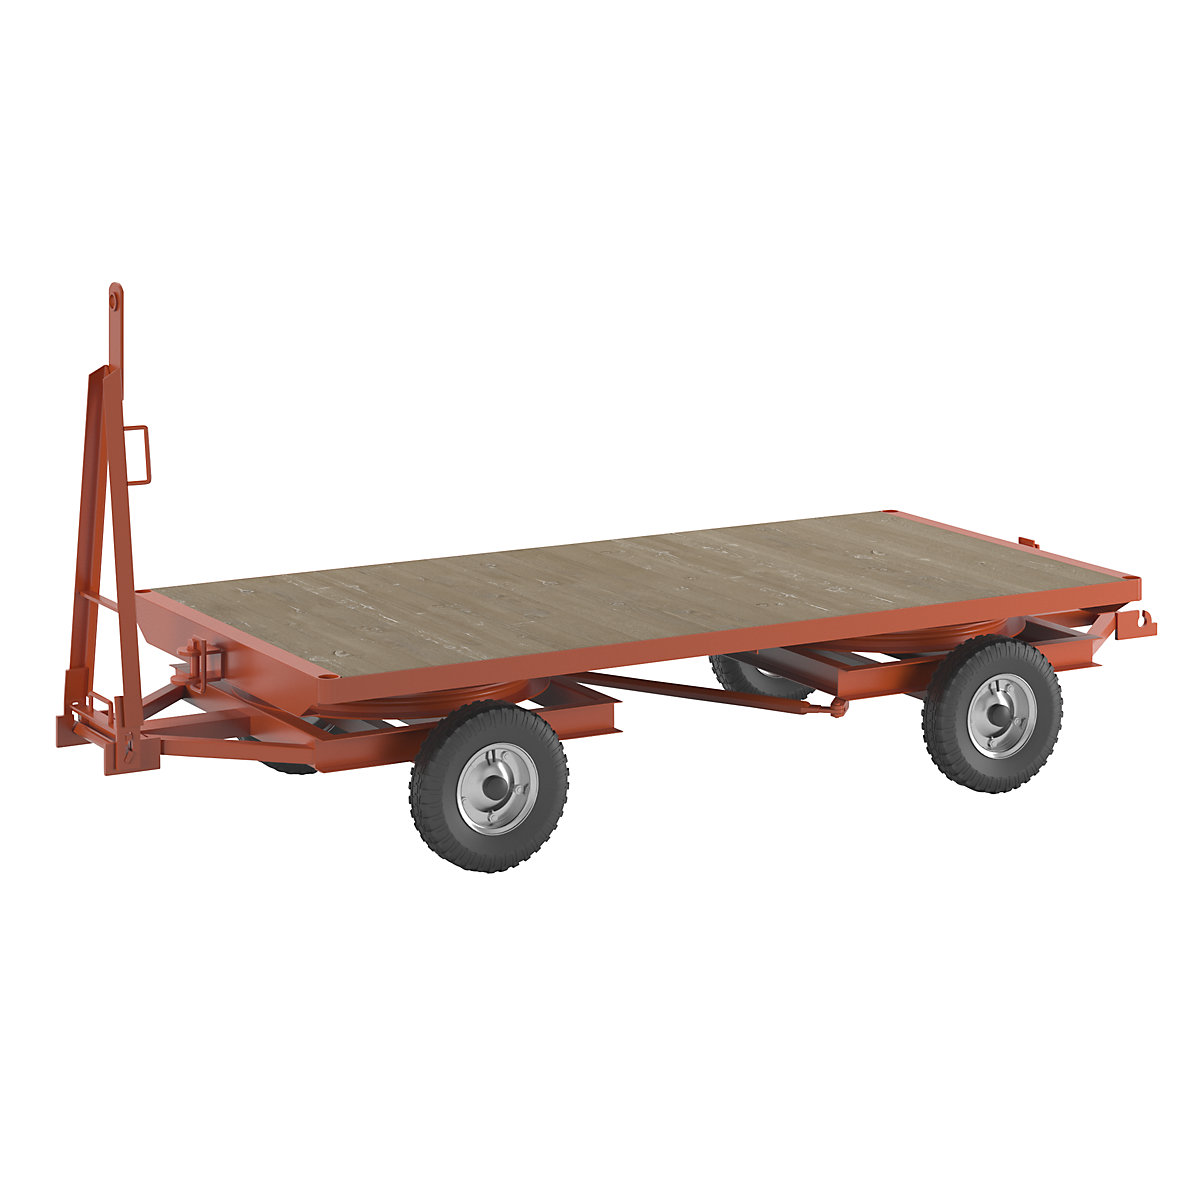 Trailer, 4-wheel double turntable steering, max. load 3 t, platform 2.5 x 1.25 m, pneumatic tyres-6